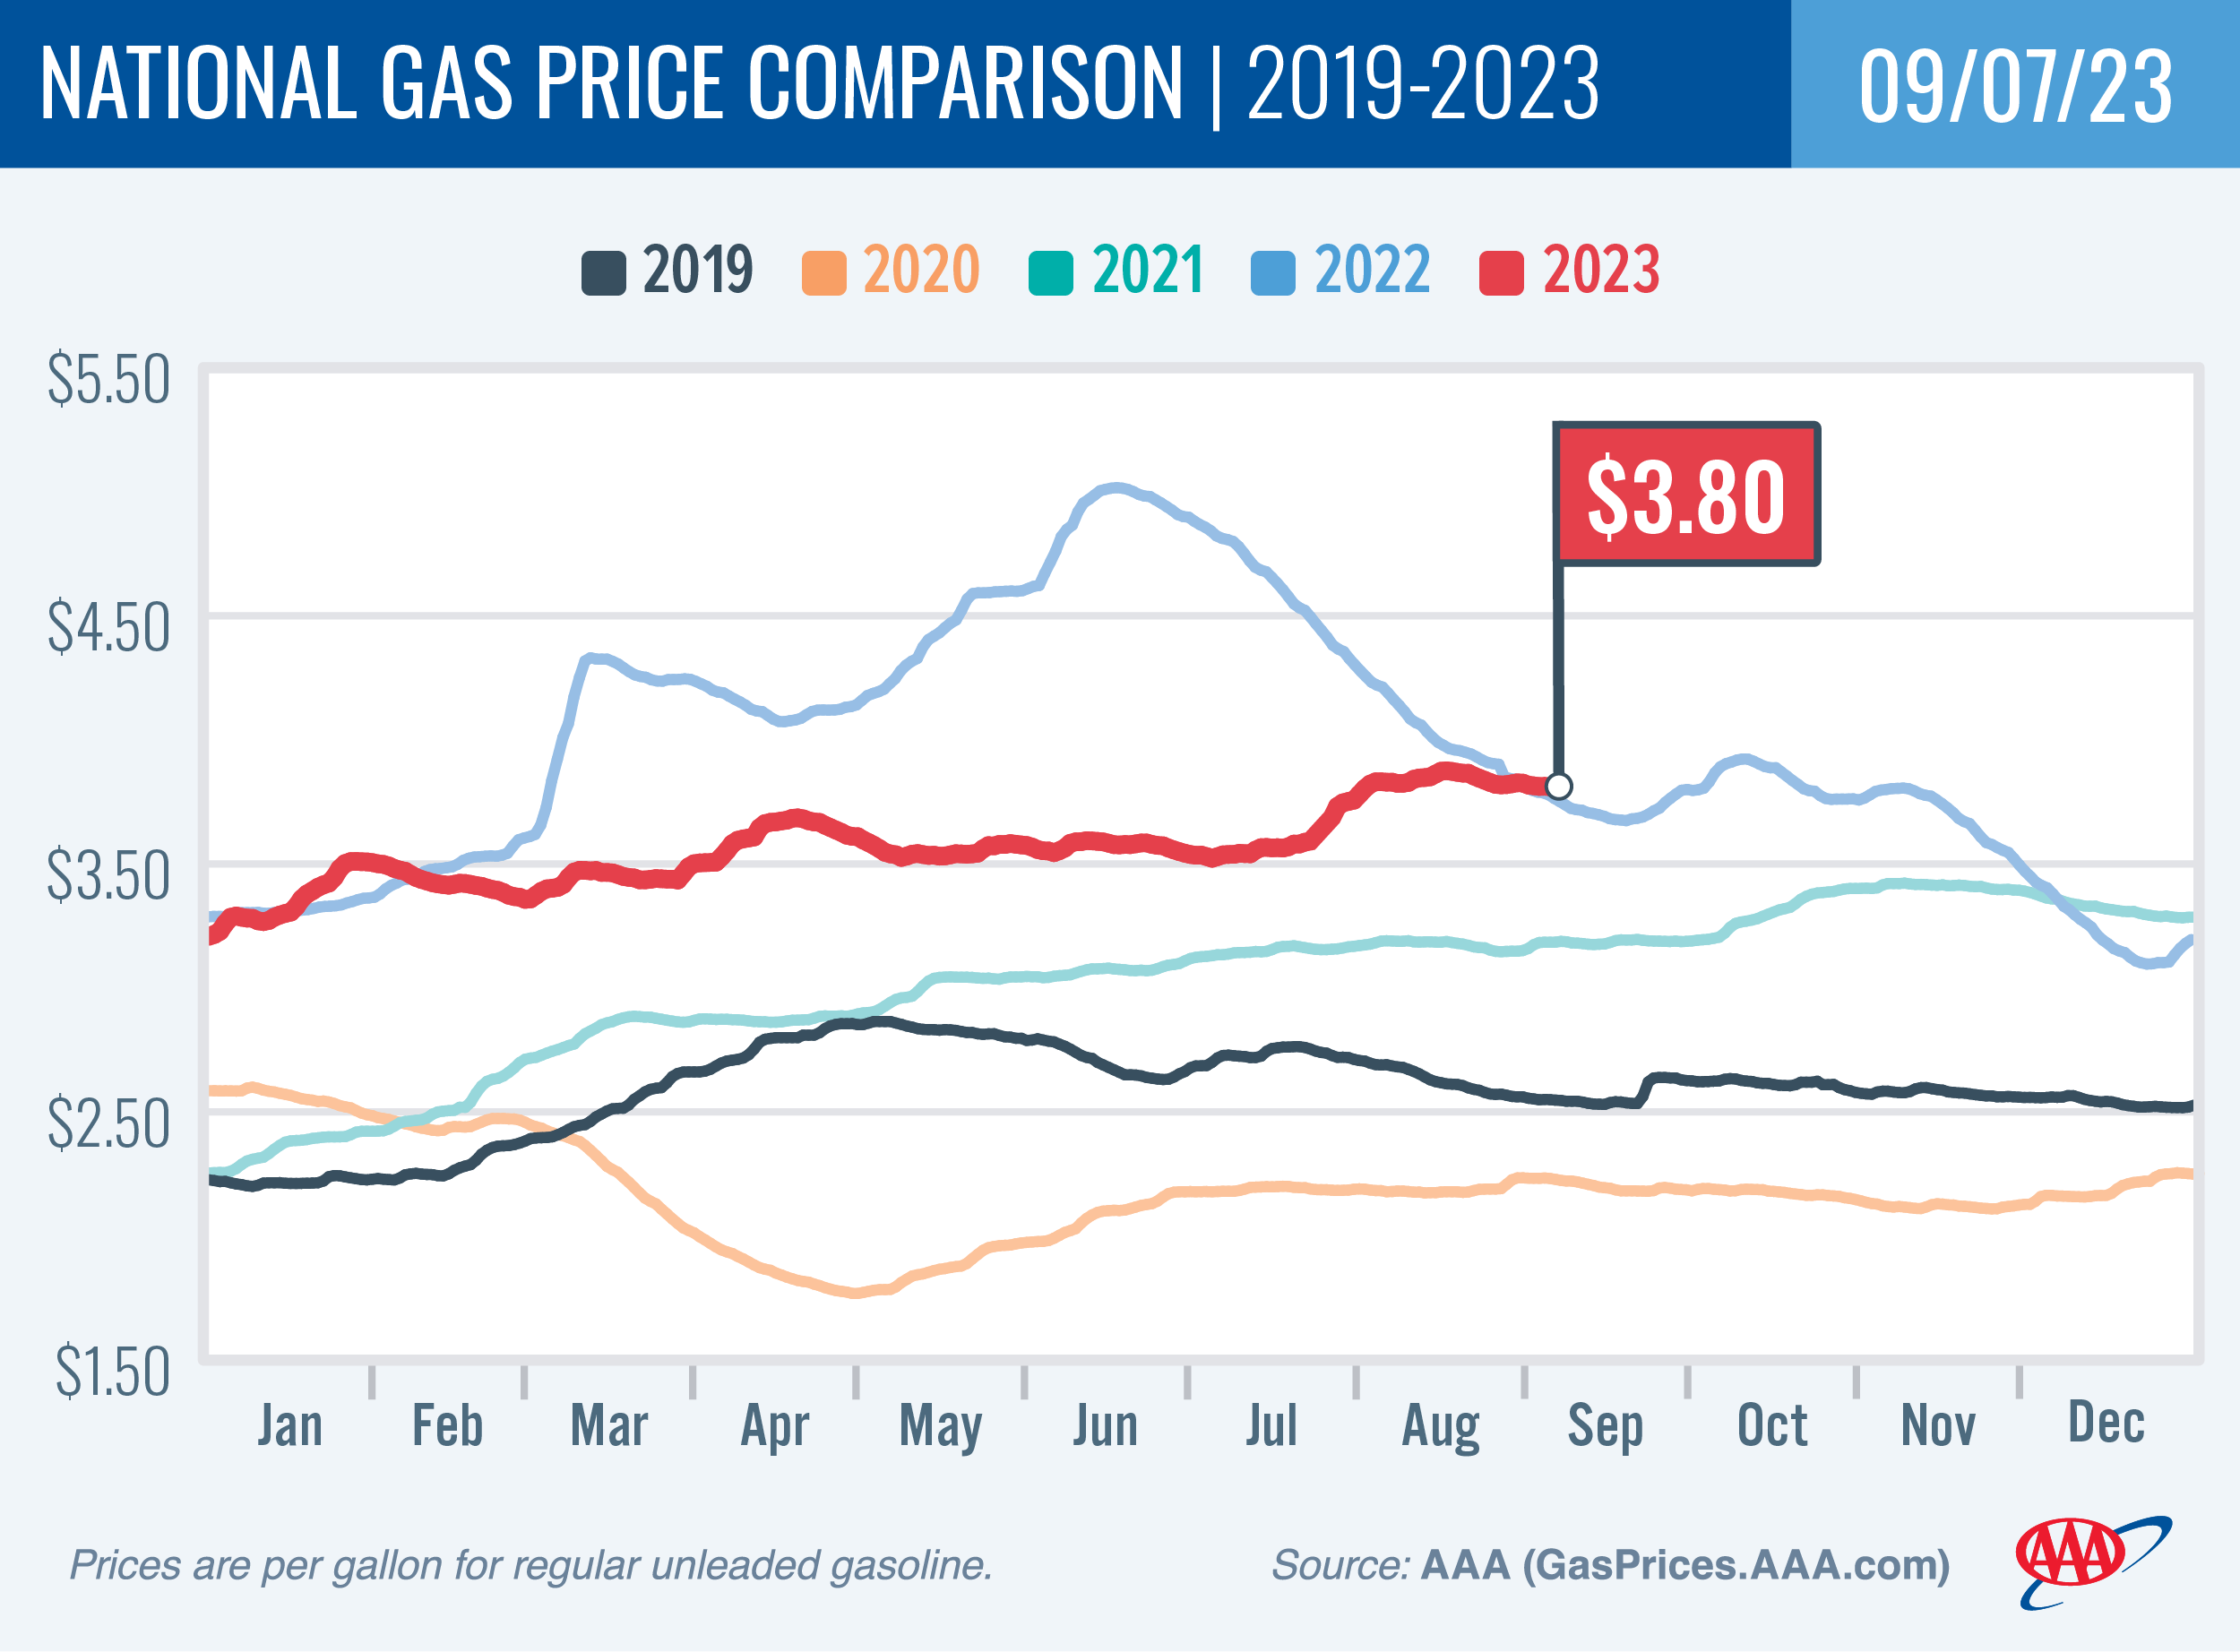 National Gas Price Comparison for September 7, 2023